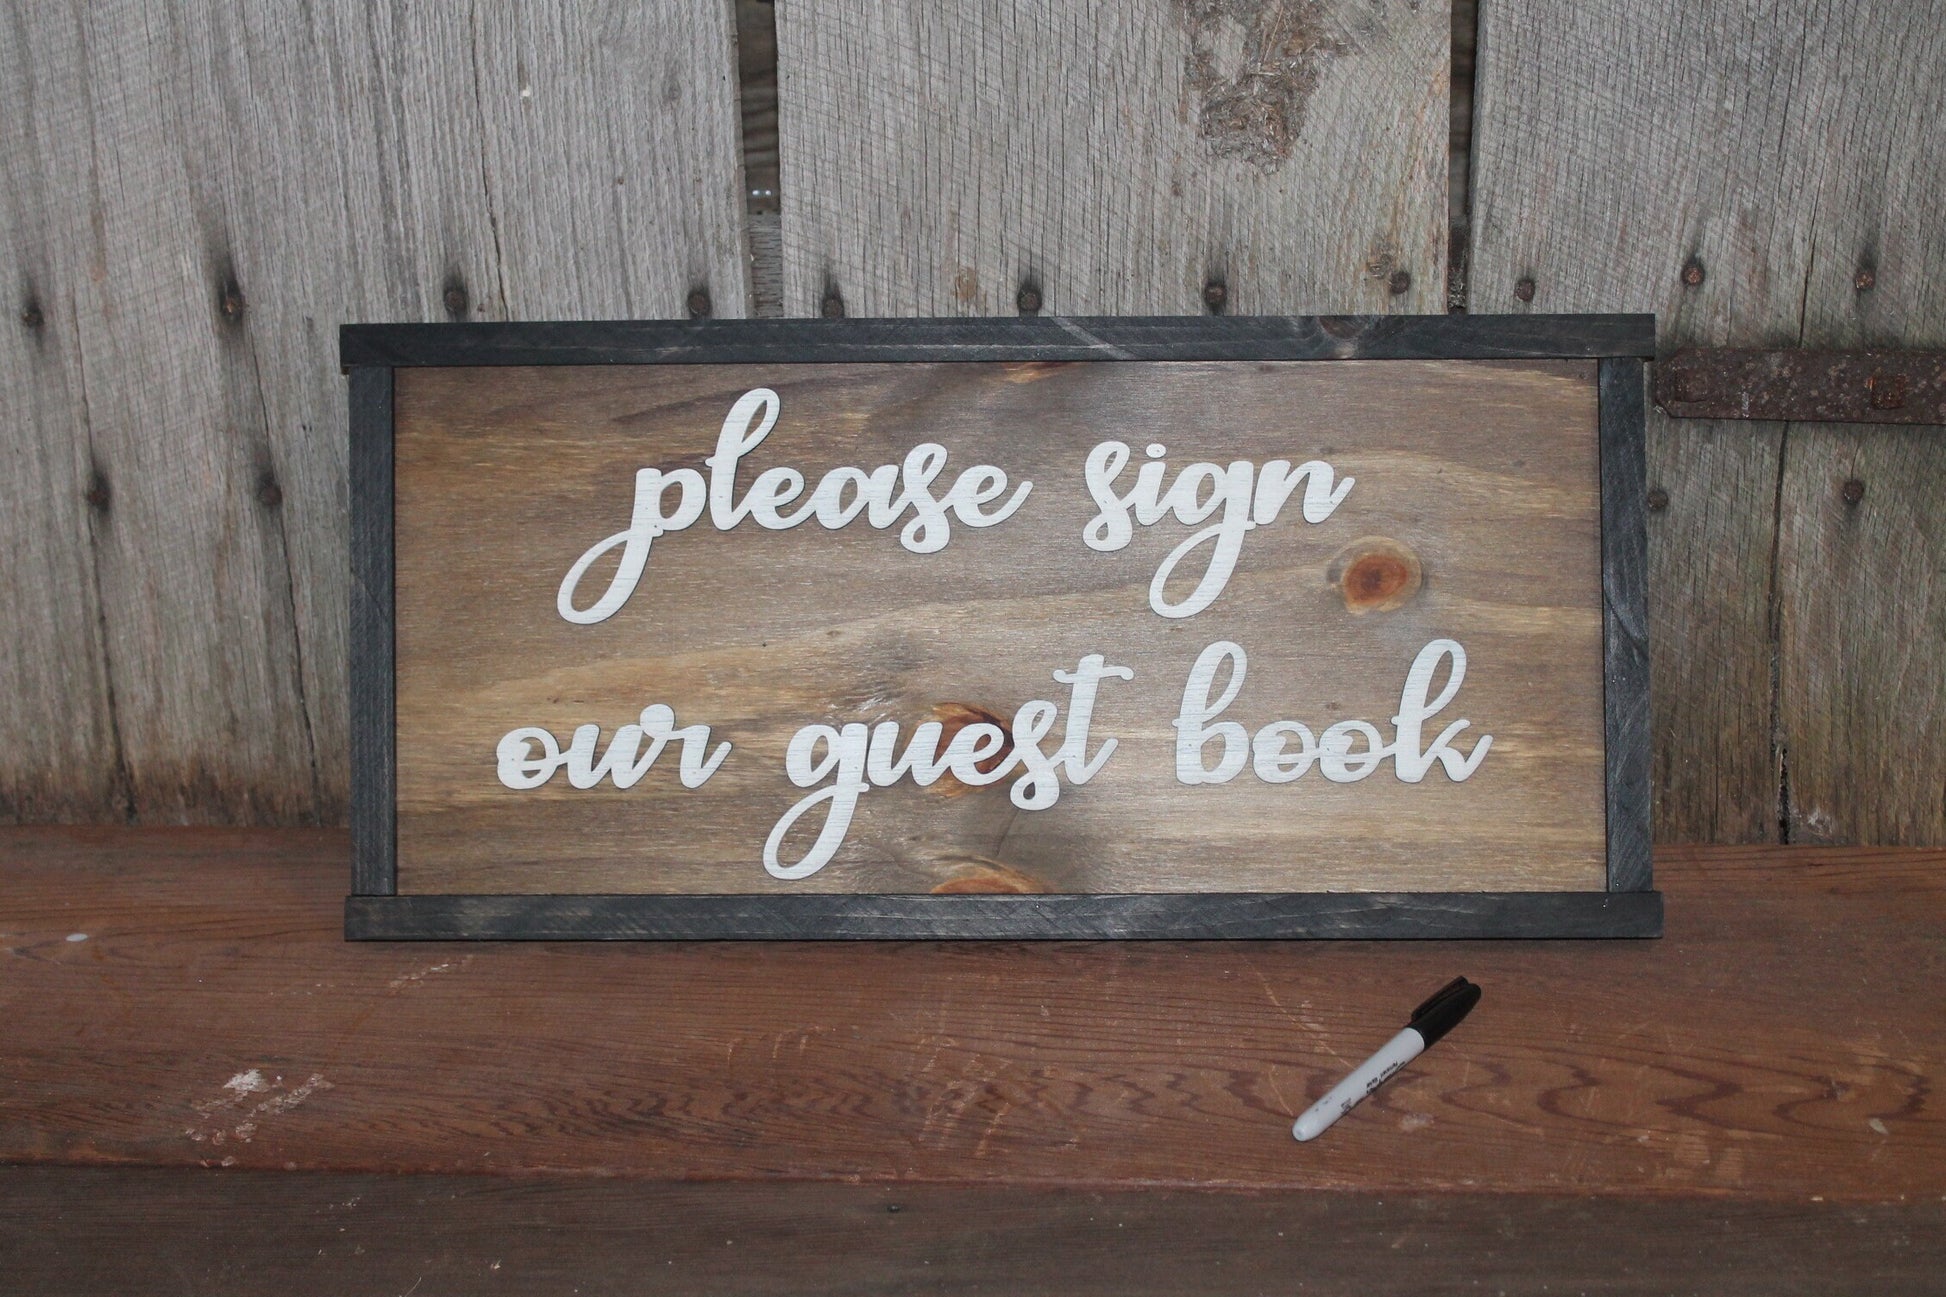 Please Sign Our Guest Book Sign Raised Text Extra Large Signage Framed Wood For Party Wedding Graduation Rustic Primitive Barn Wood Country